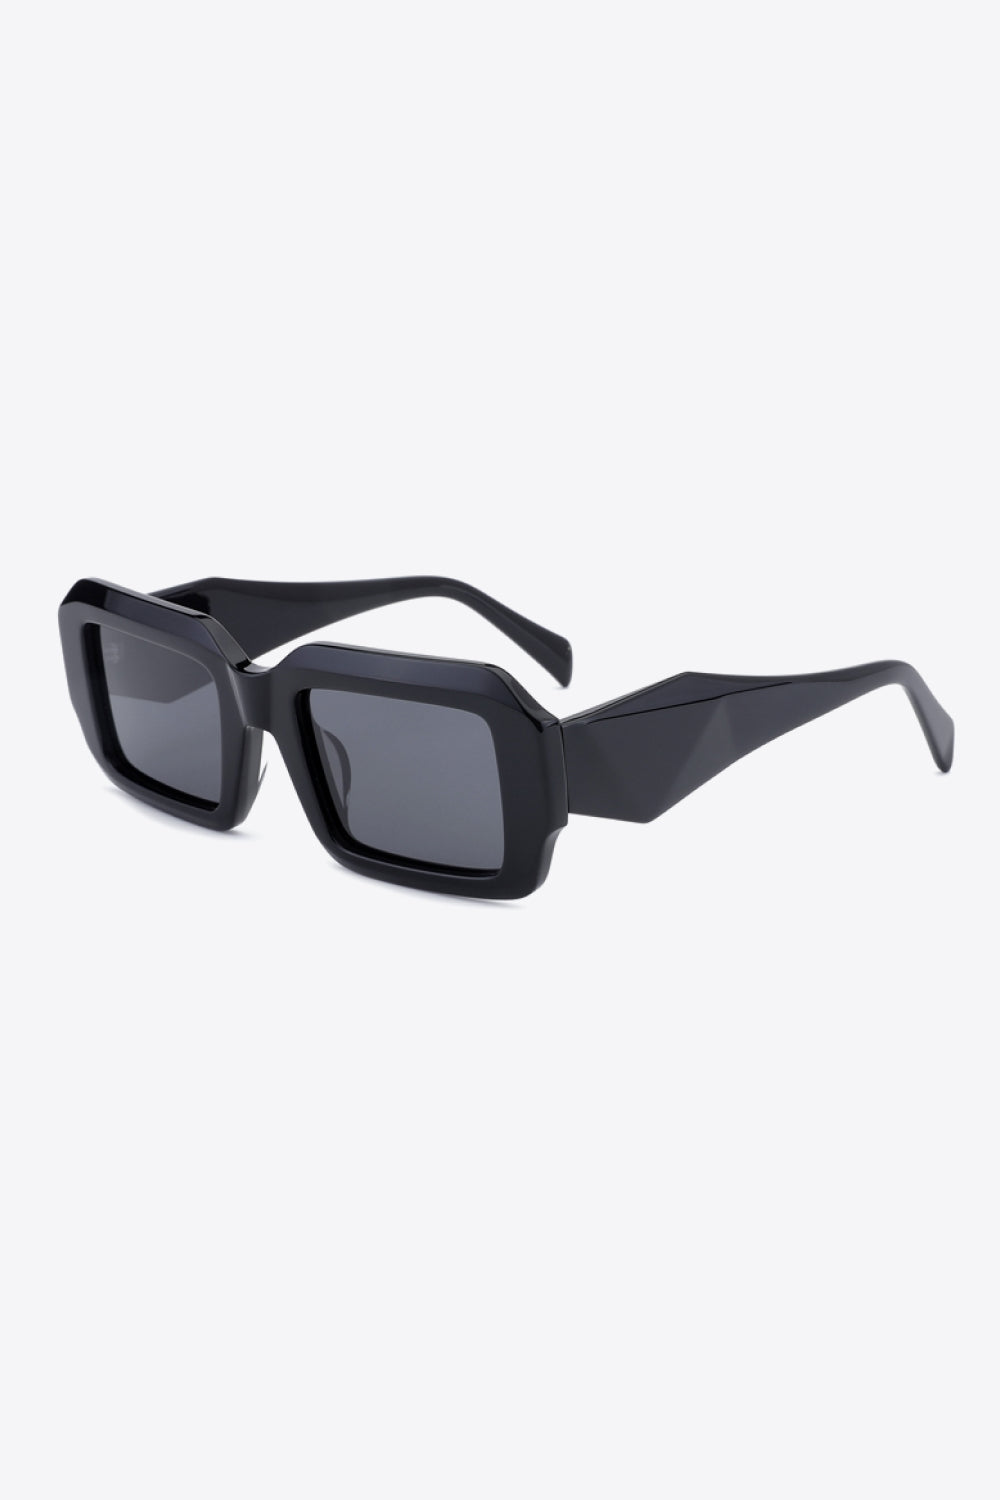 Abstract Rectangle Womens Sunglasses